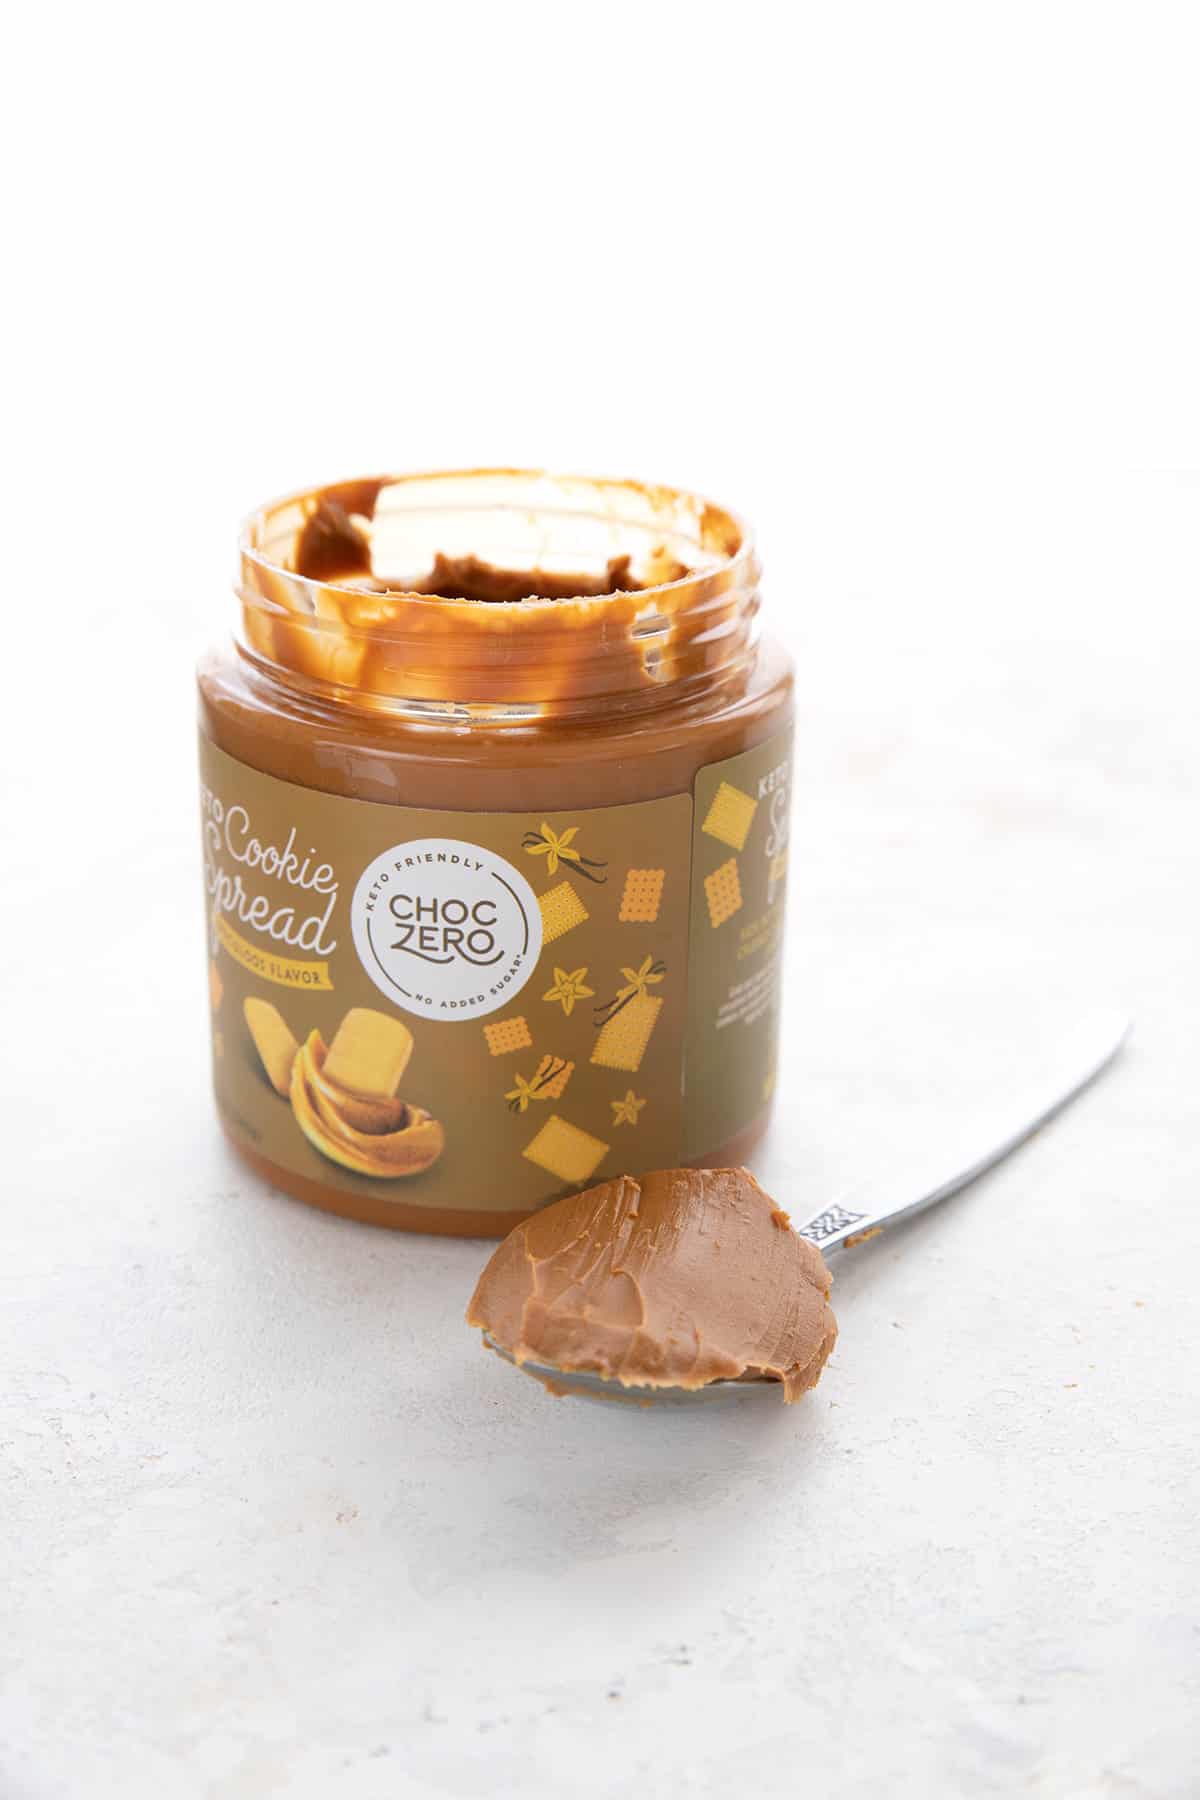 A jar of keto cookie butter spread with a spoonful in front.